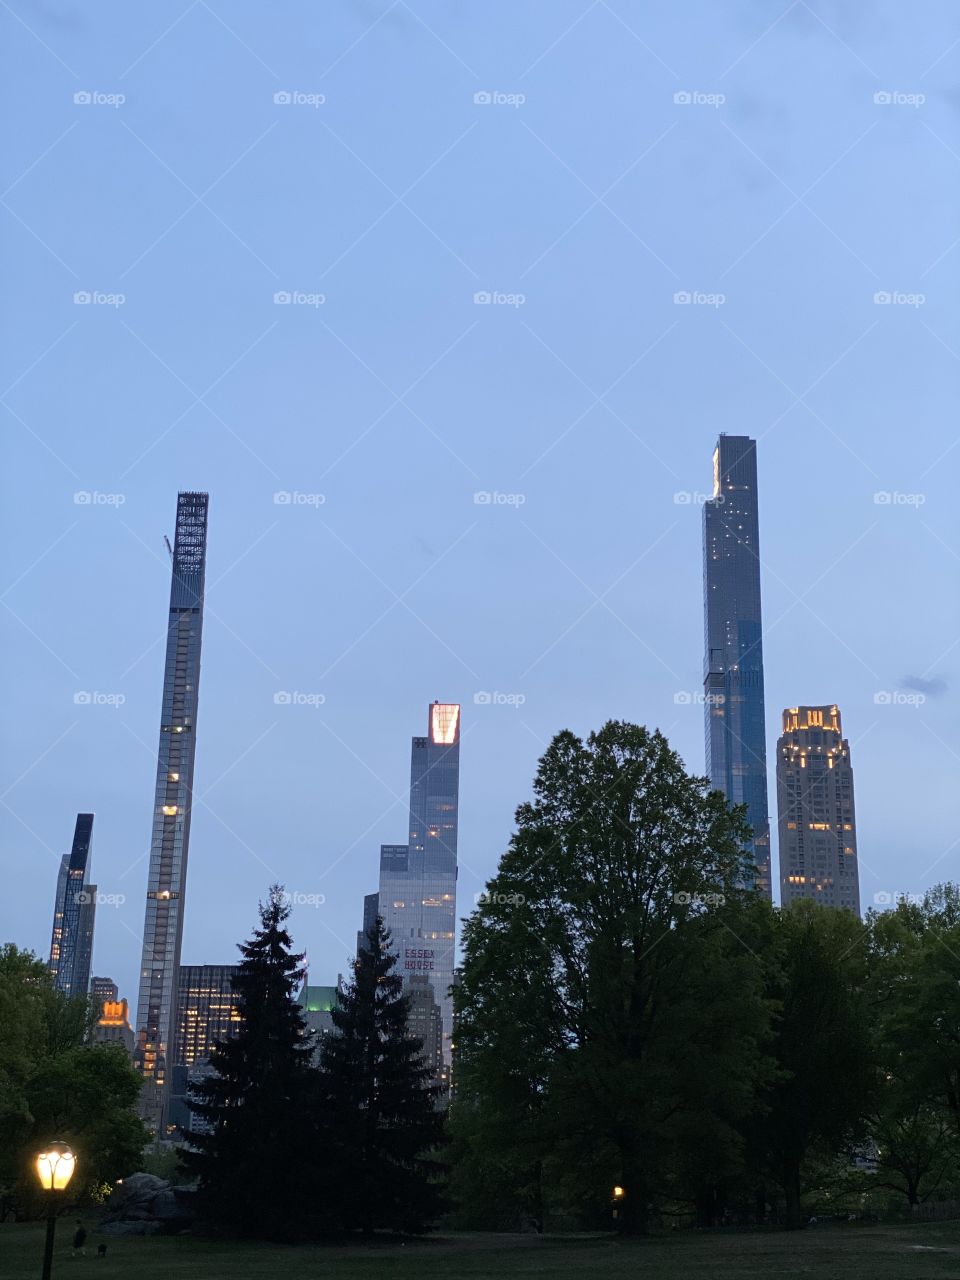 Buildings with the lights on inside. Dusk, trees, with blue sky background, structures.